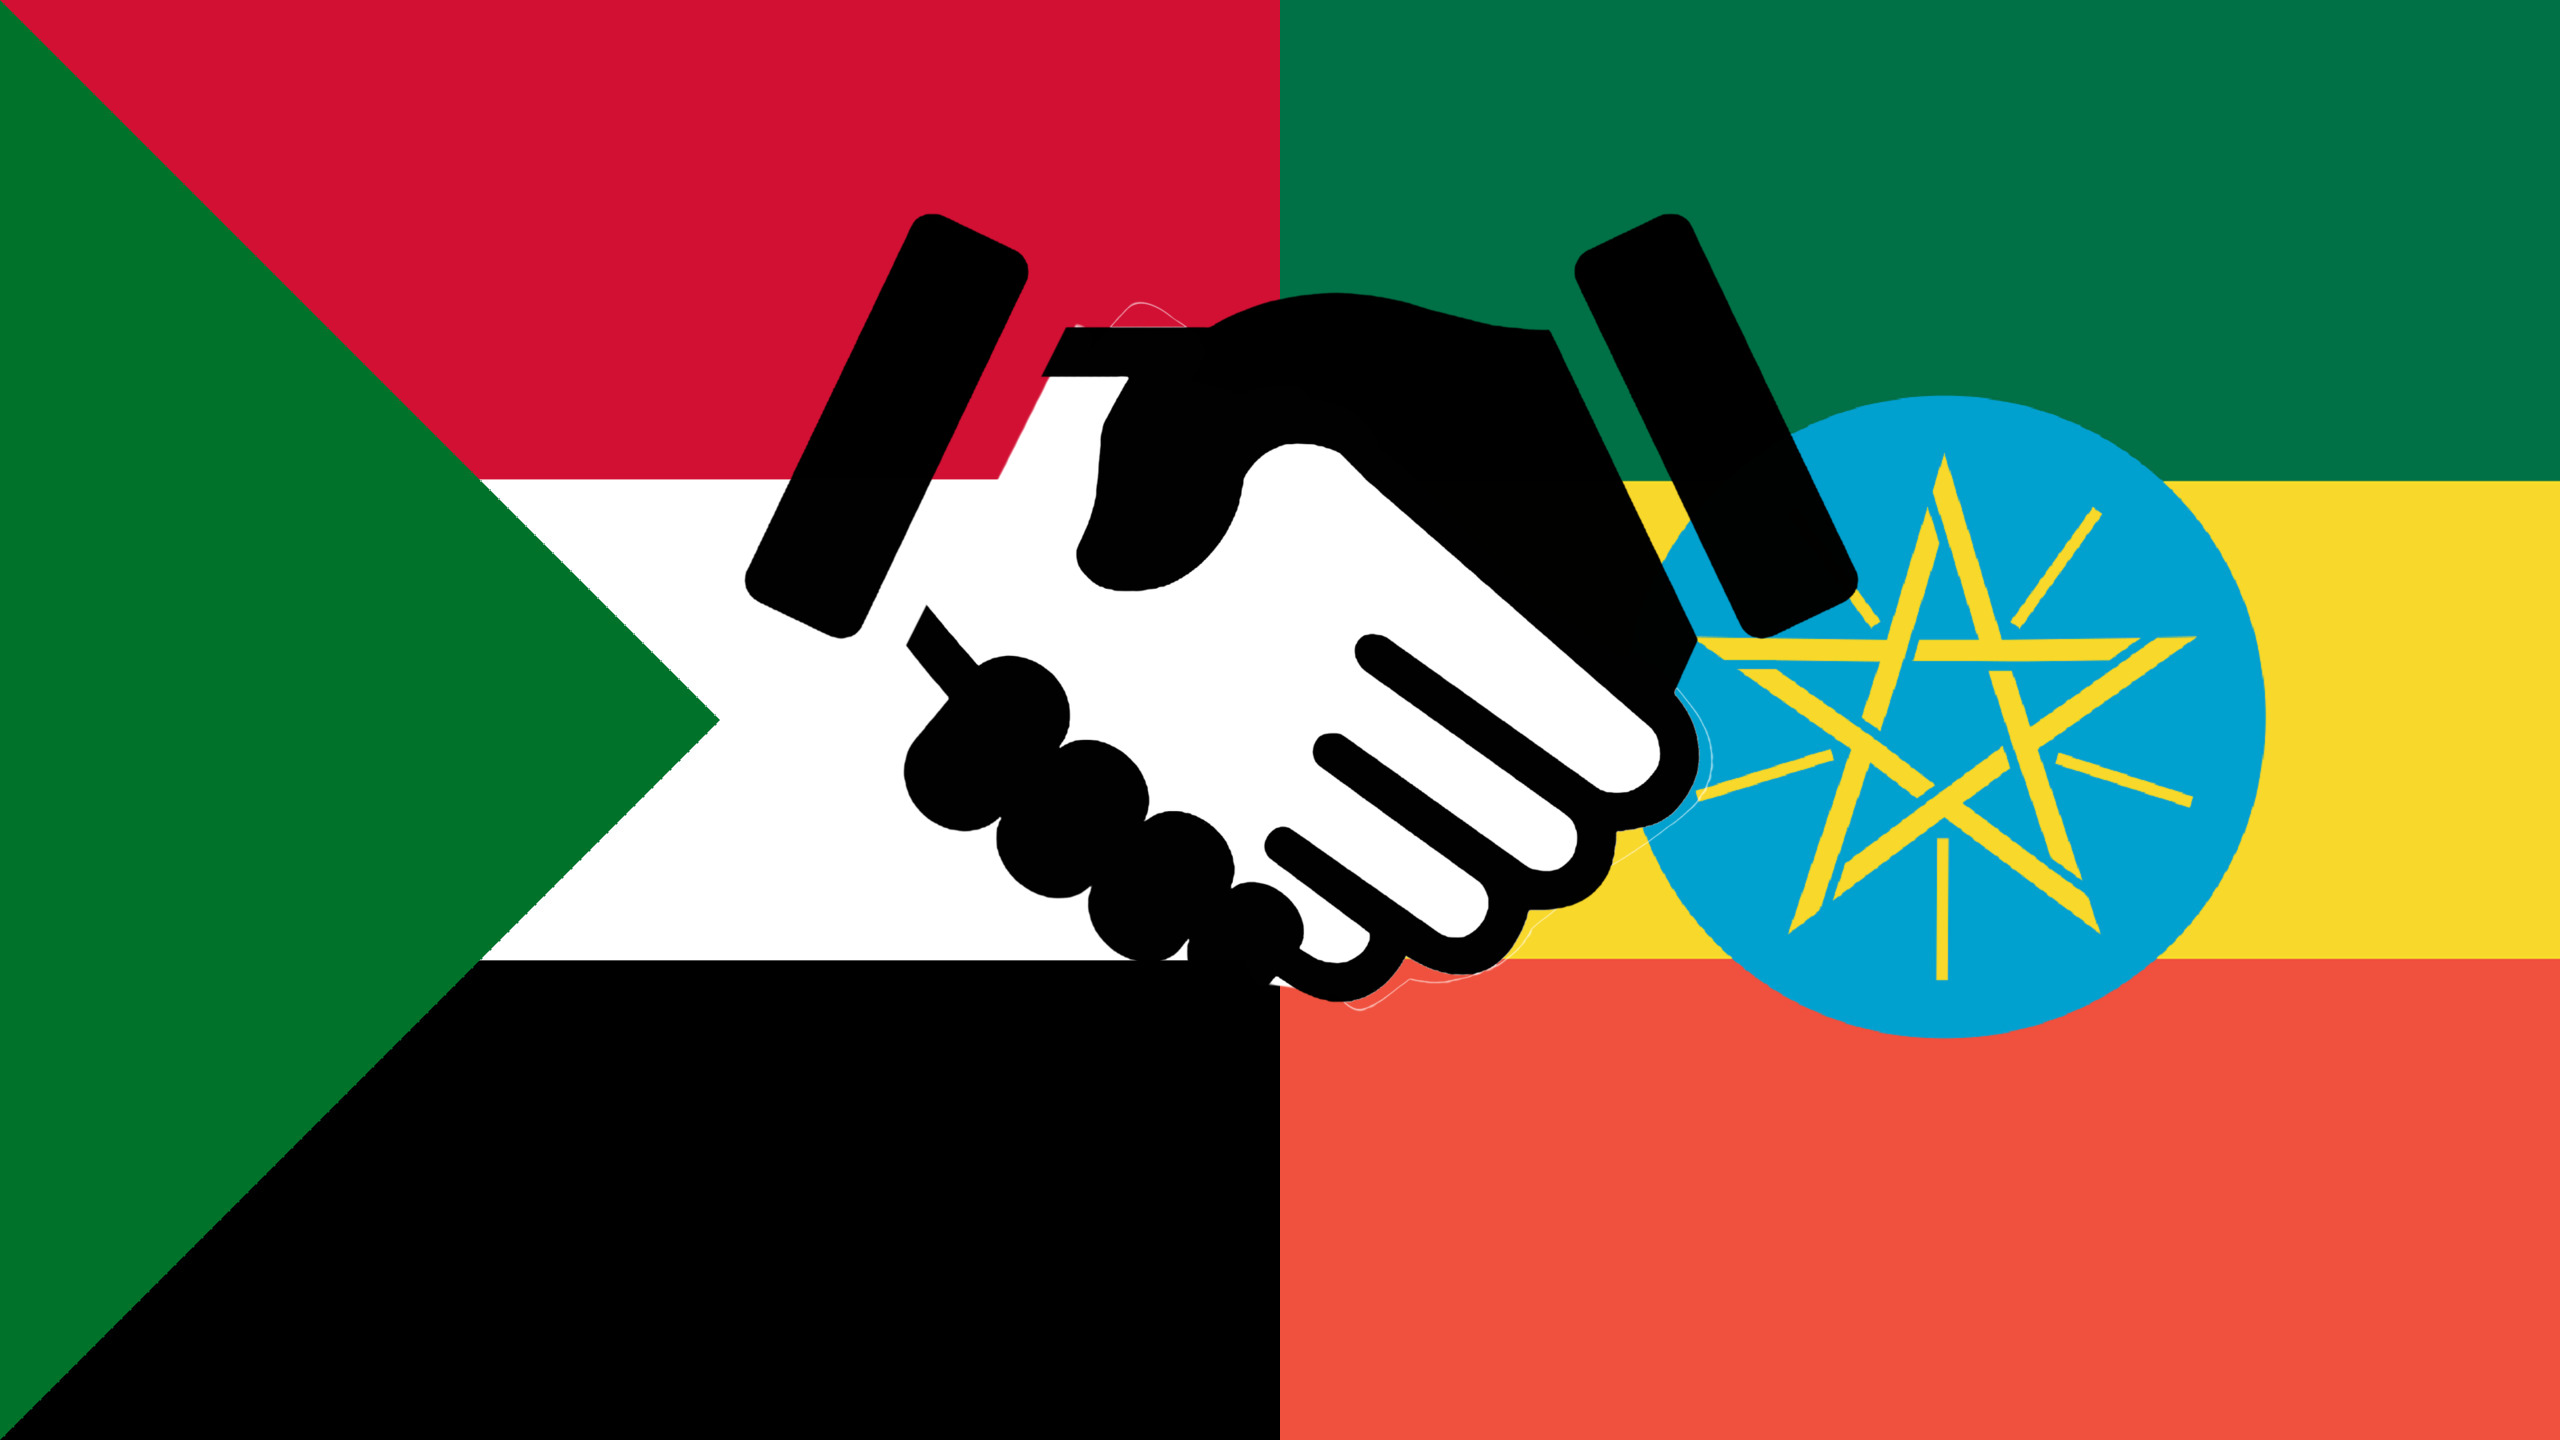 Nervous Neighboring North-African Nations Negotiate, Noting Need for Niceness